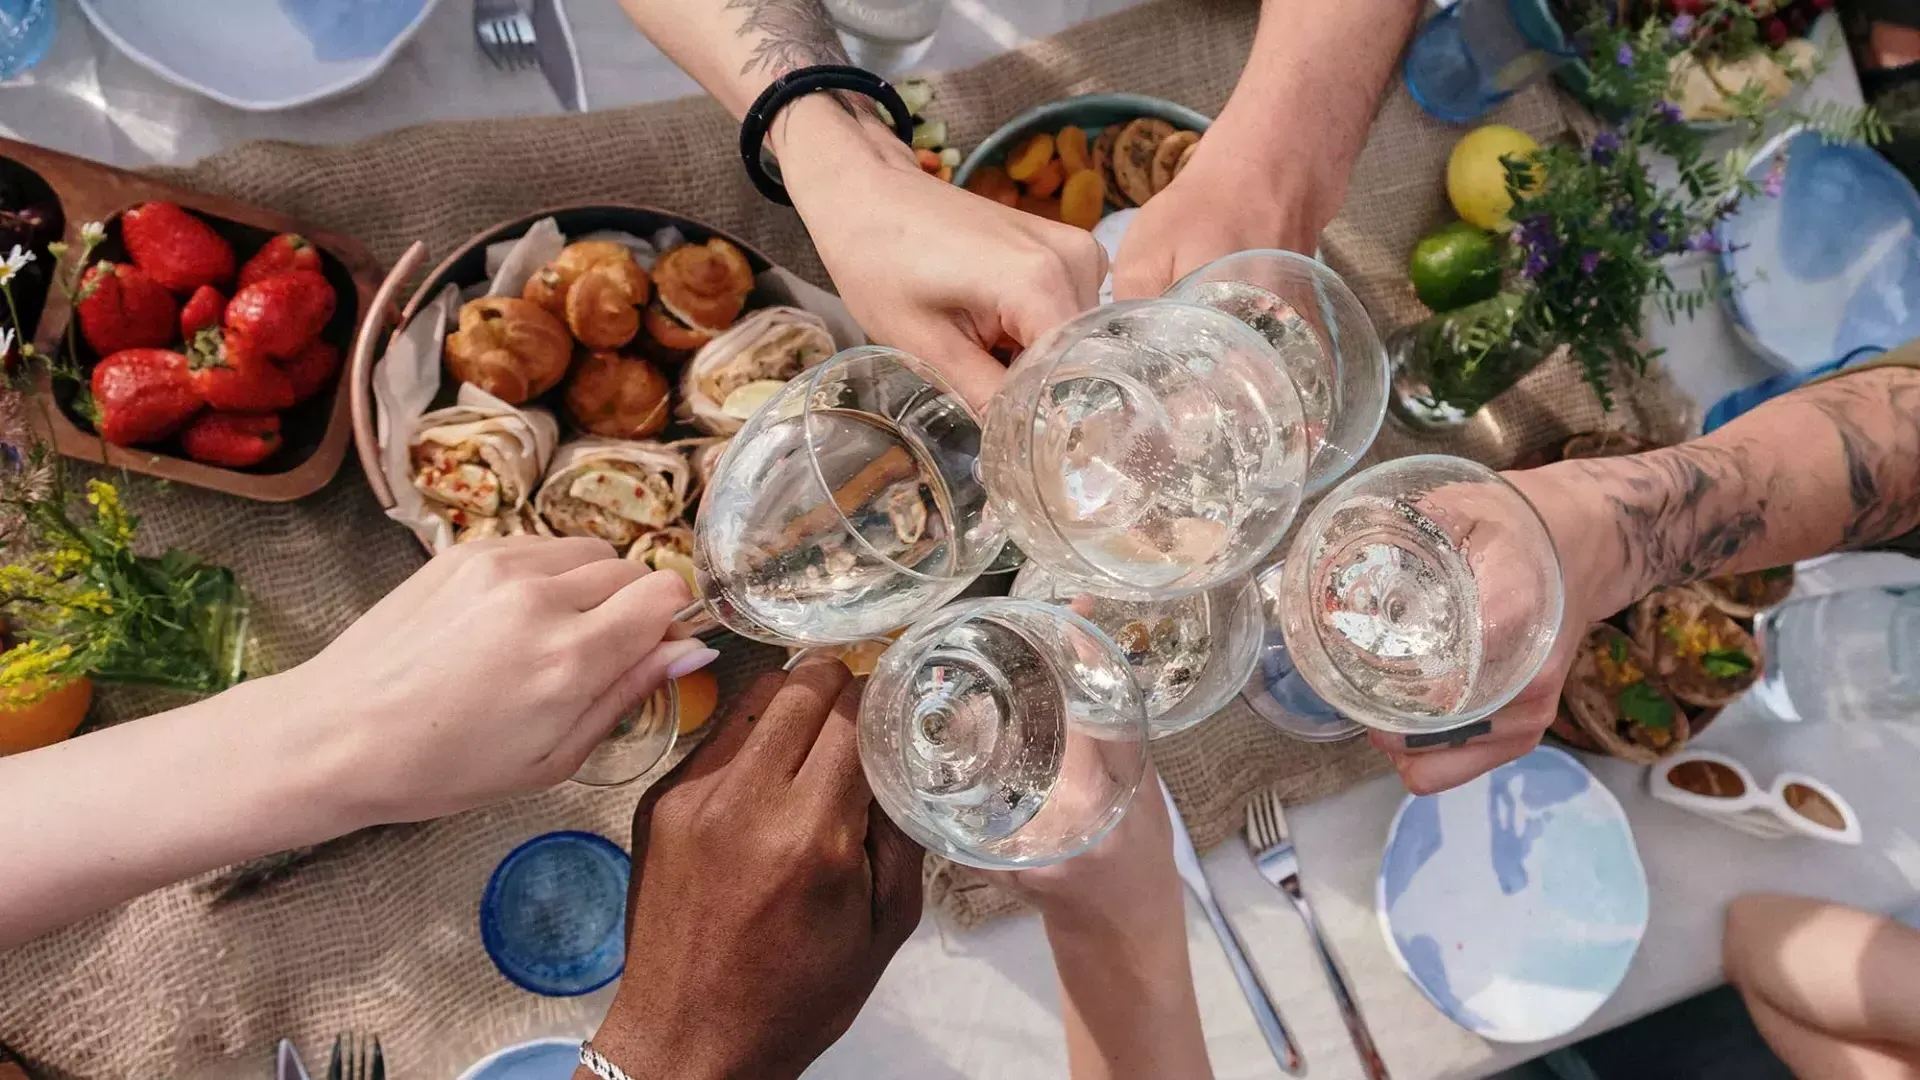 Overhead shot of a group of people clinking glasses at a brunch table.